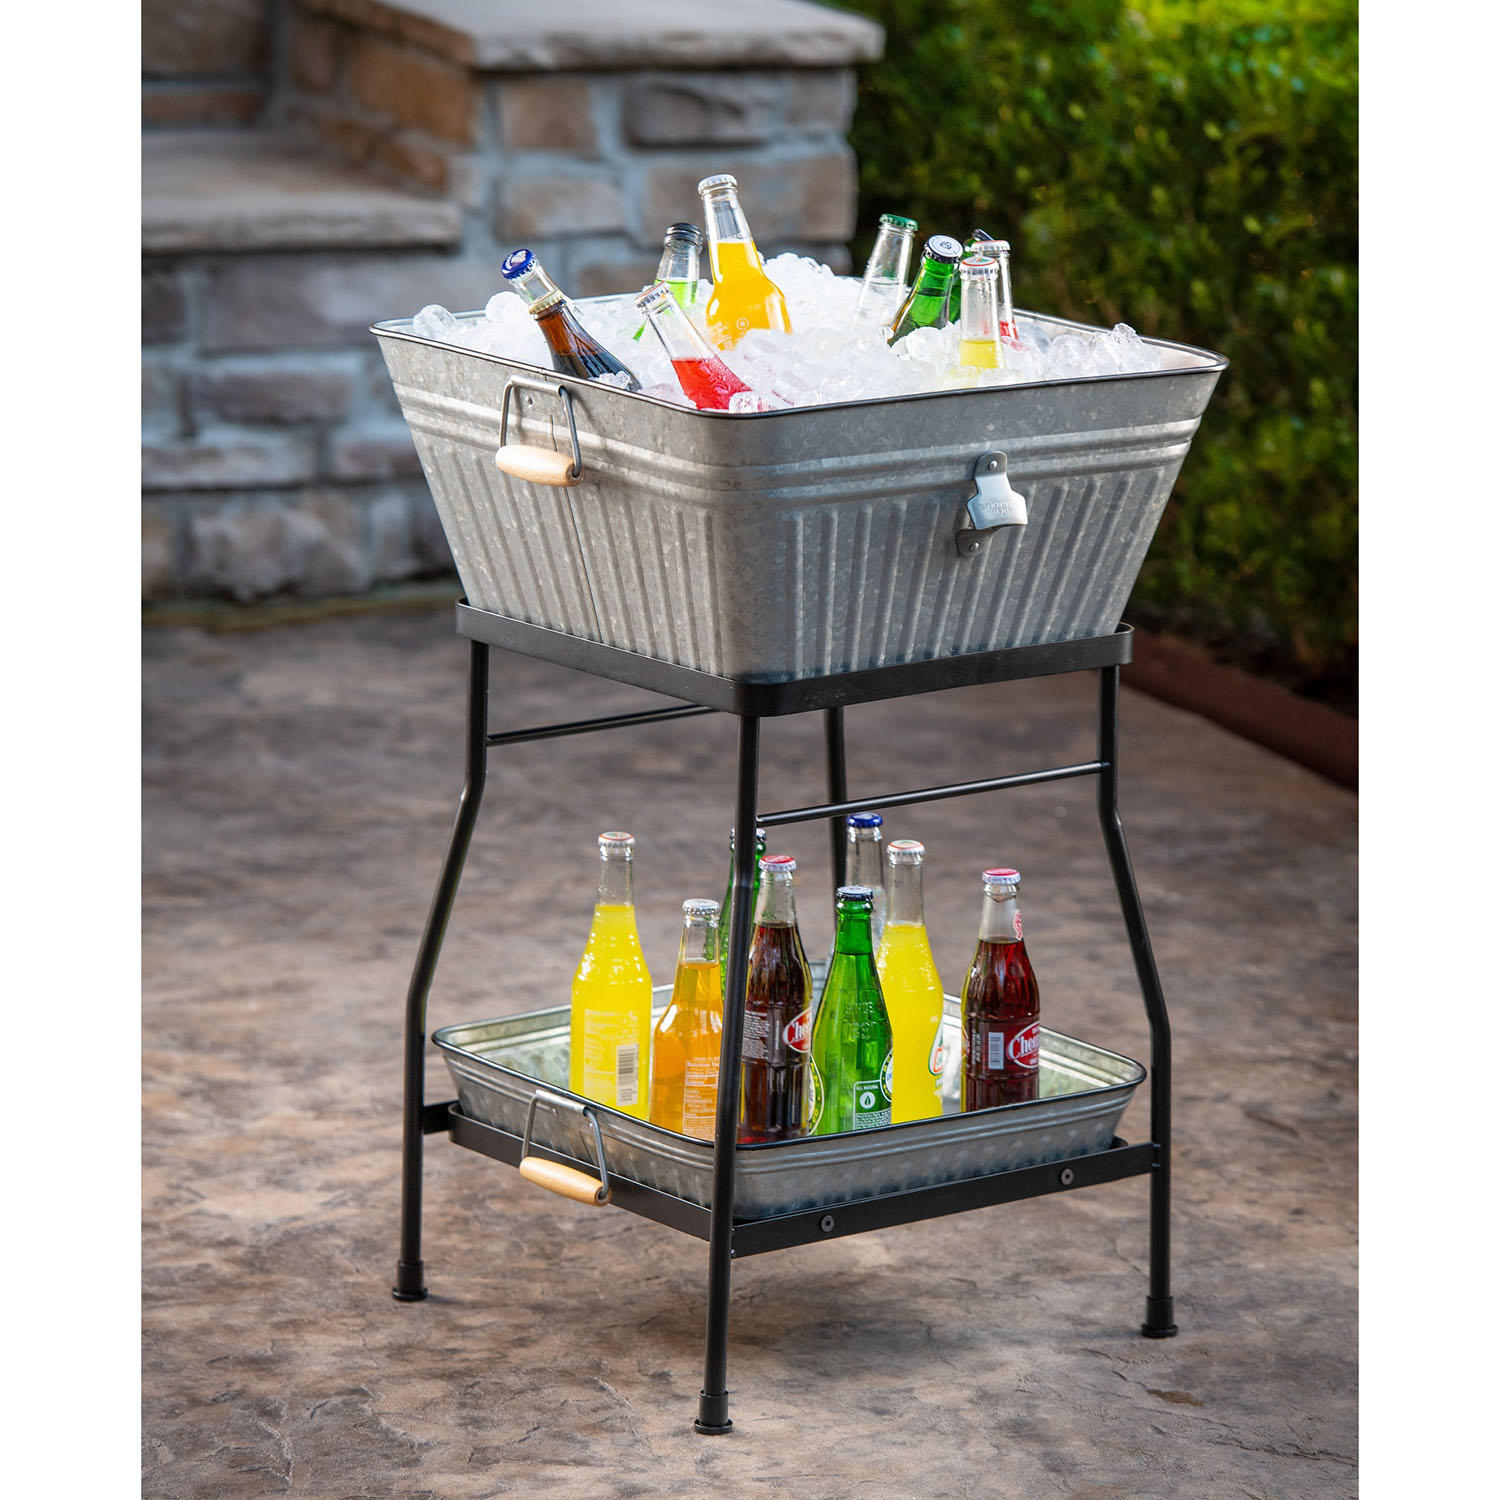 Member’s Mark Beverage Tub and Tray with Stand Set